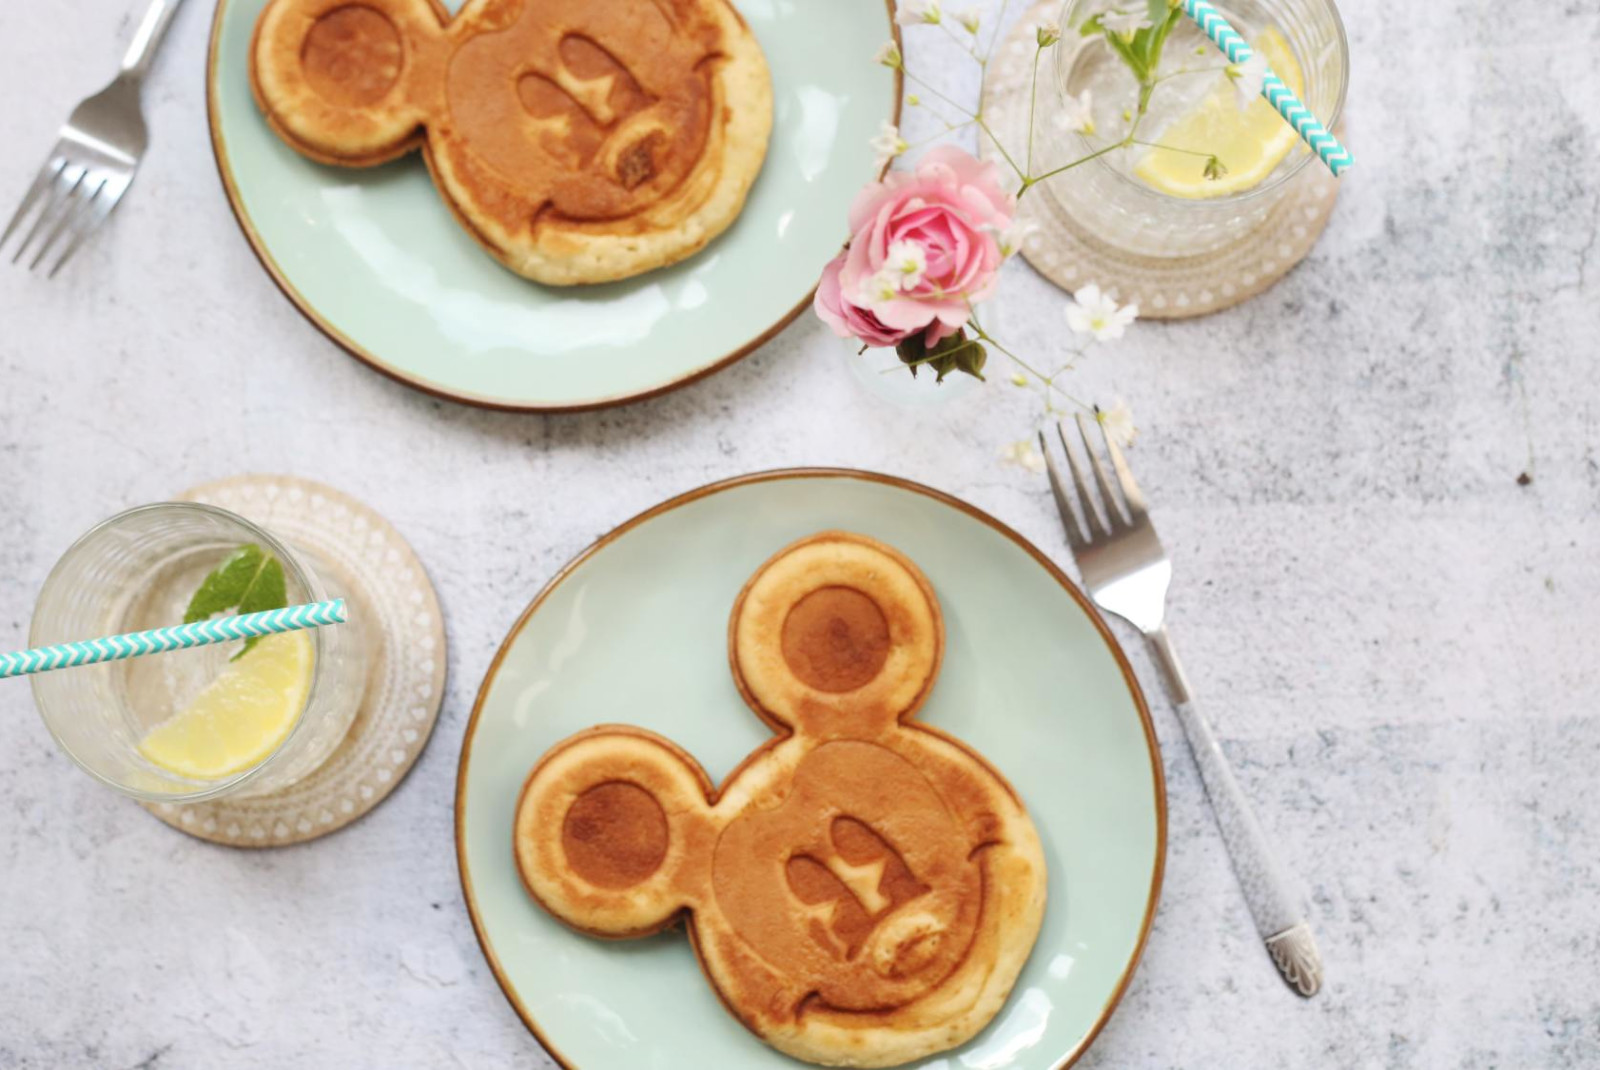 Mickey Mouse shaped pancakes in tea plates with water and utensils on the side.